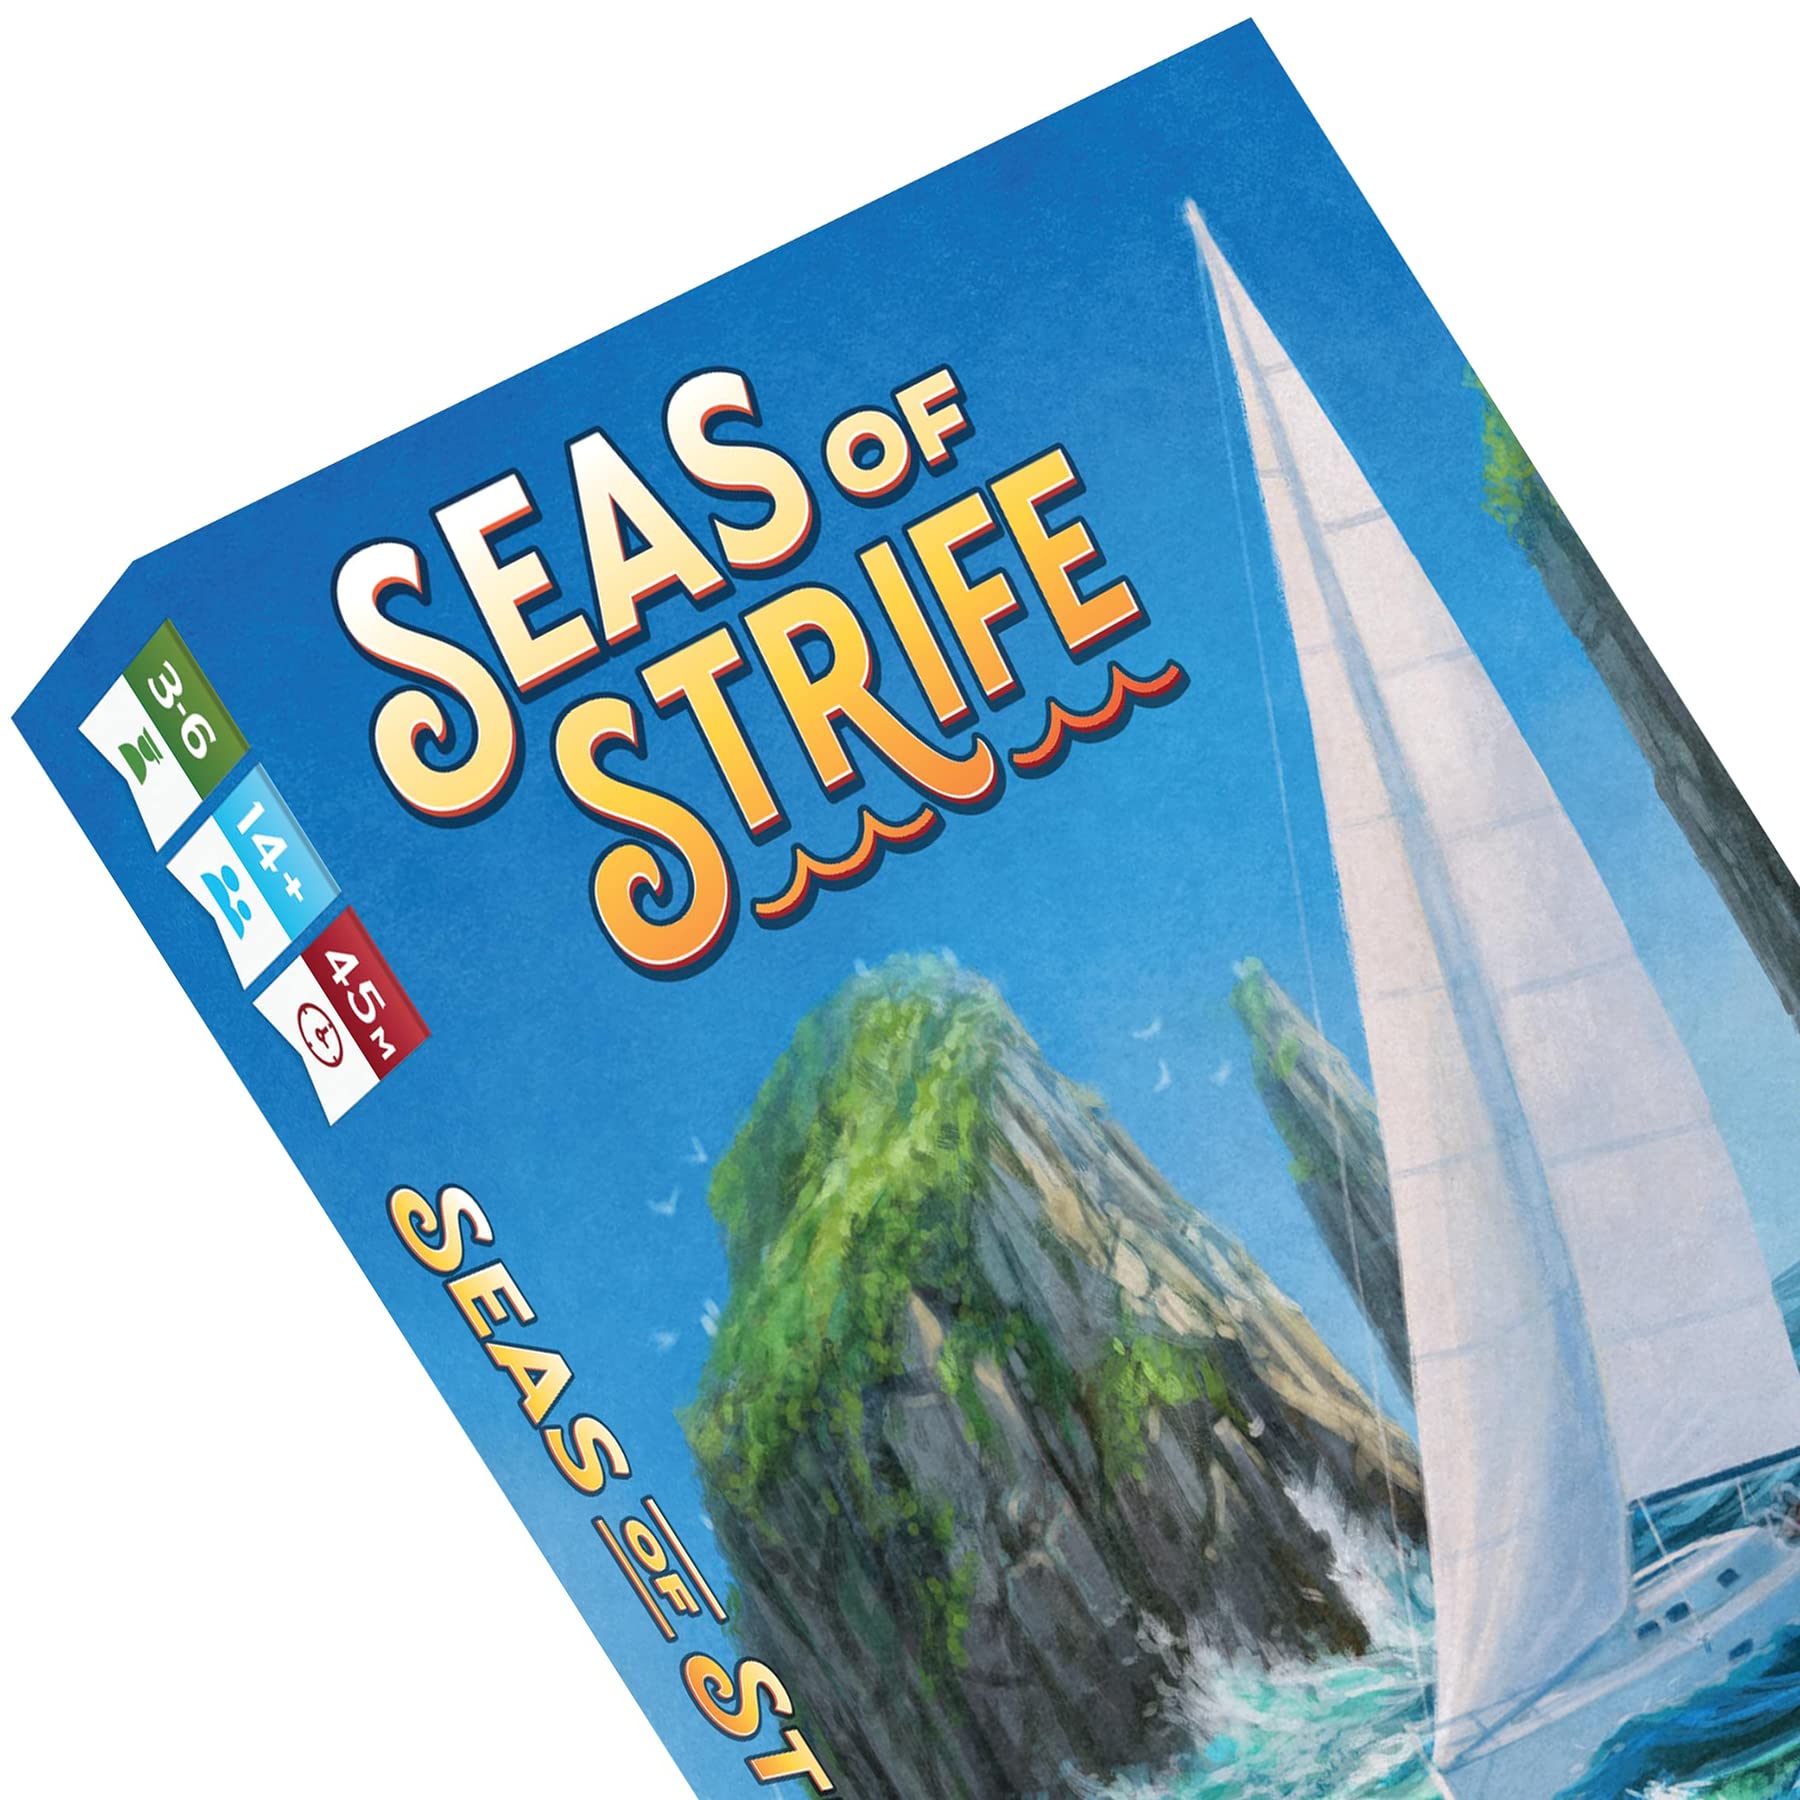 Seas of Strife - Rio Grande Games, Trick Taking -Card Game, Ages 14+, 3-6 Players, 45 Min